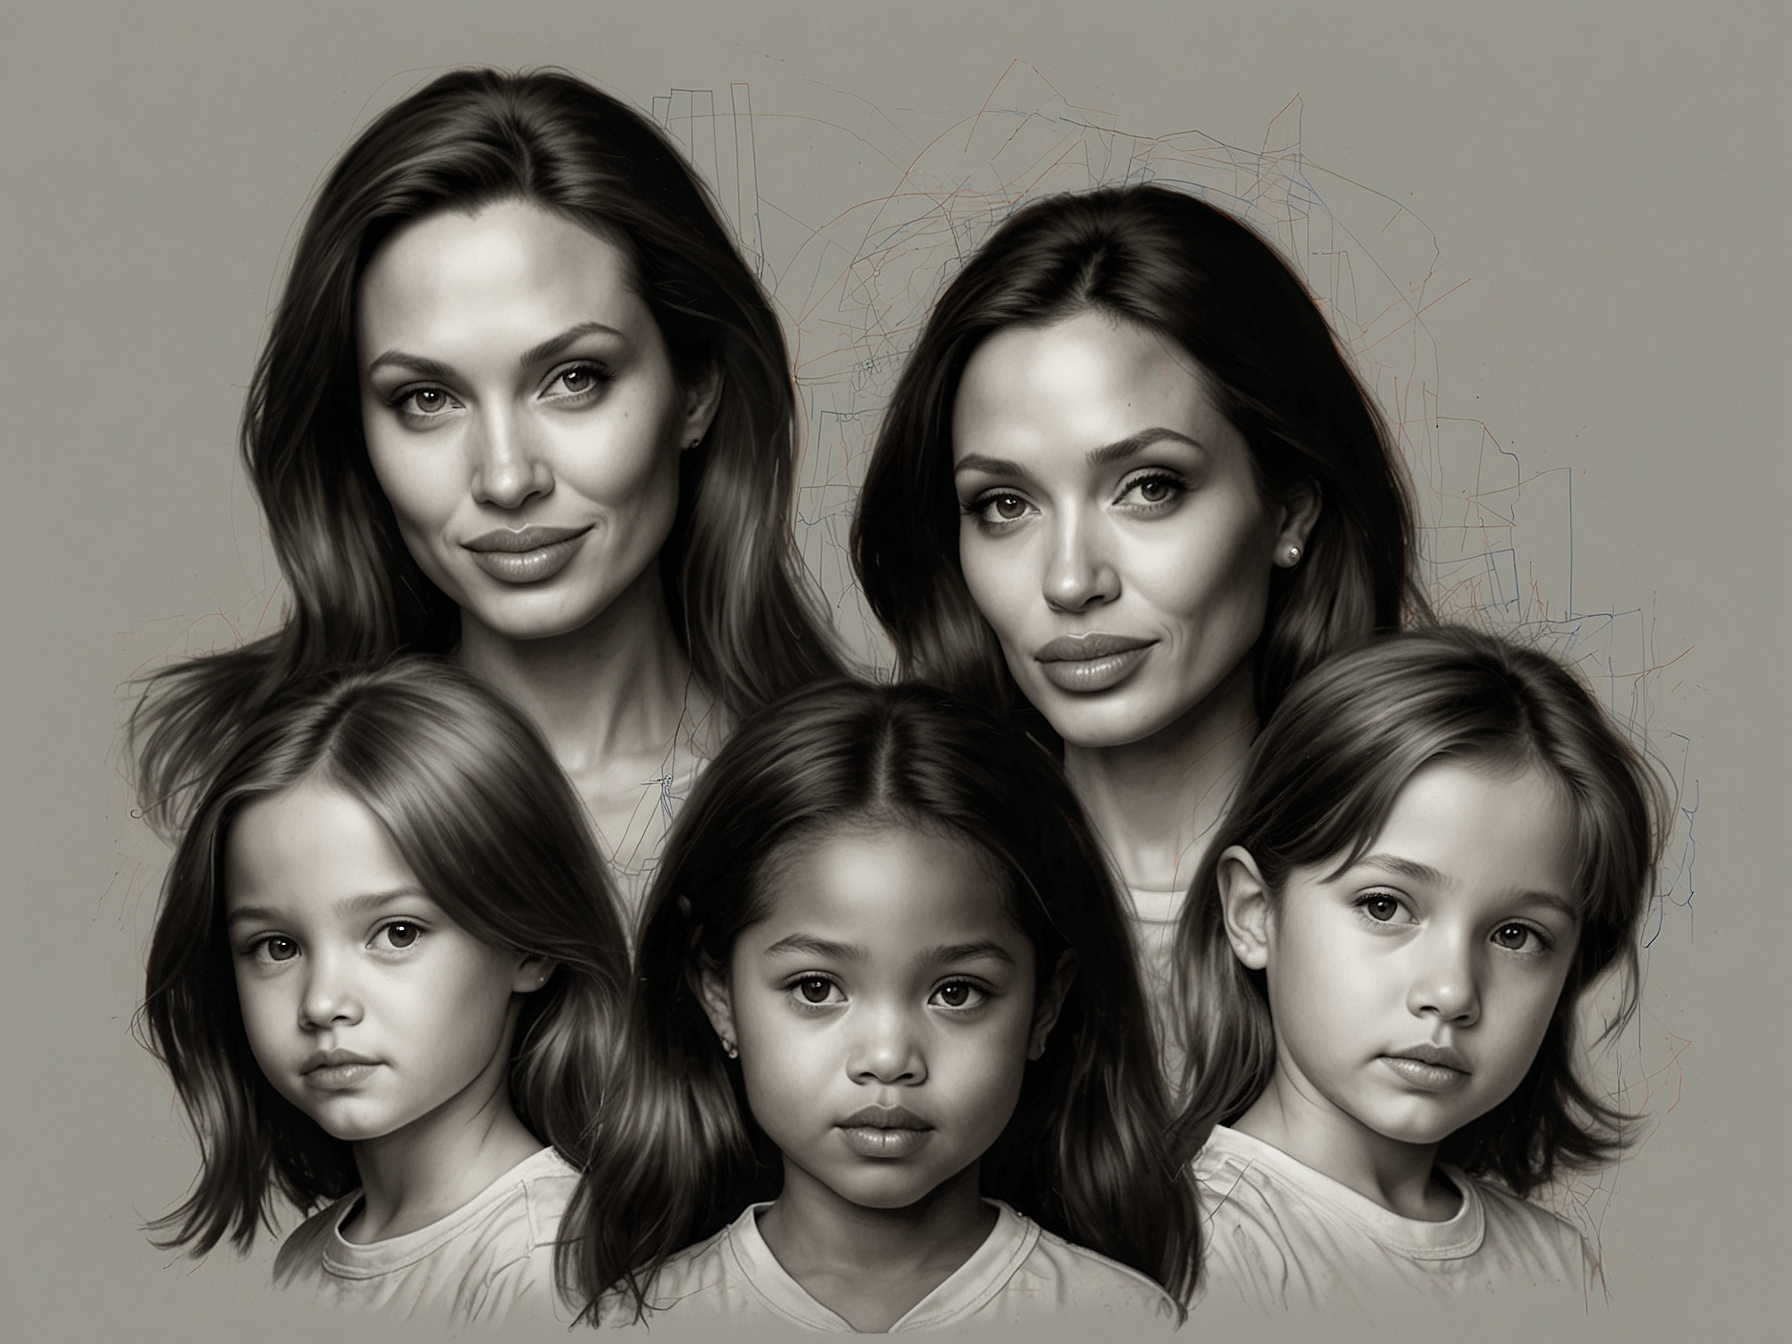 A collage featuring Angelina Jolie's six children—Maddox, Pax, Zahara, Shiloh, Knox, and Vivienne—showcasing their individuality and achievements, reflecting the influence of their famous mother.